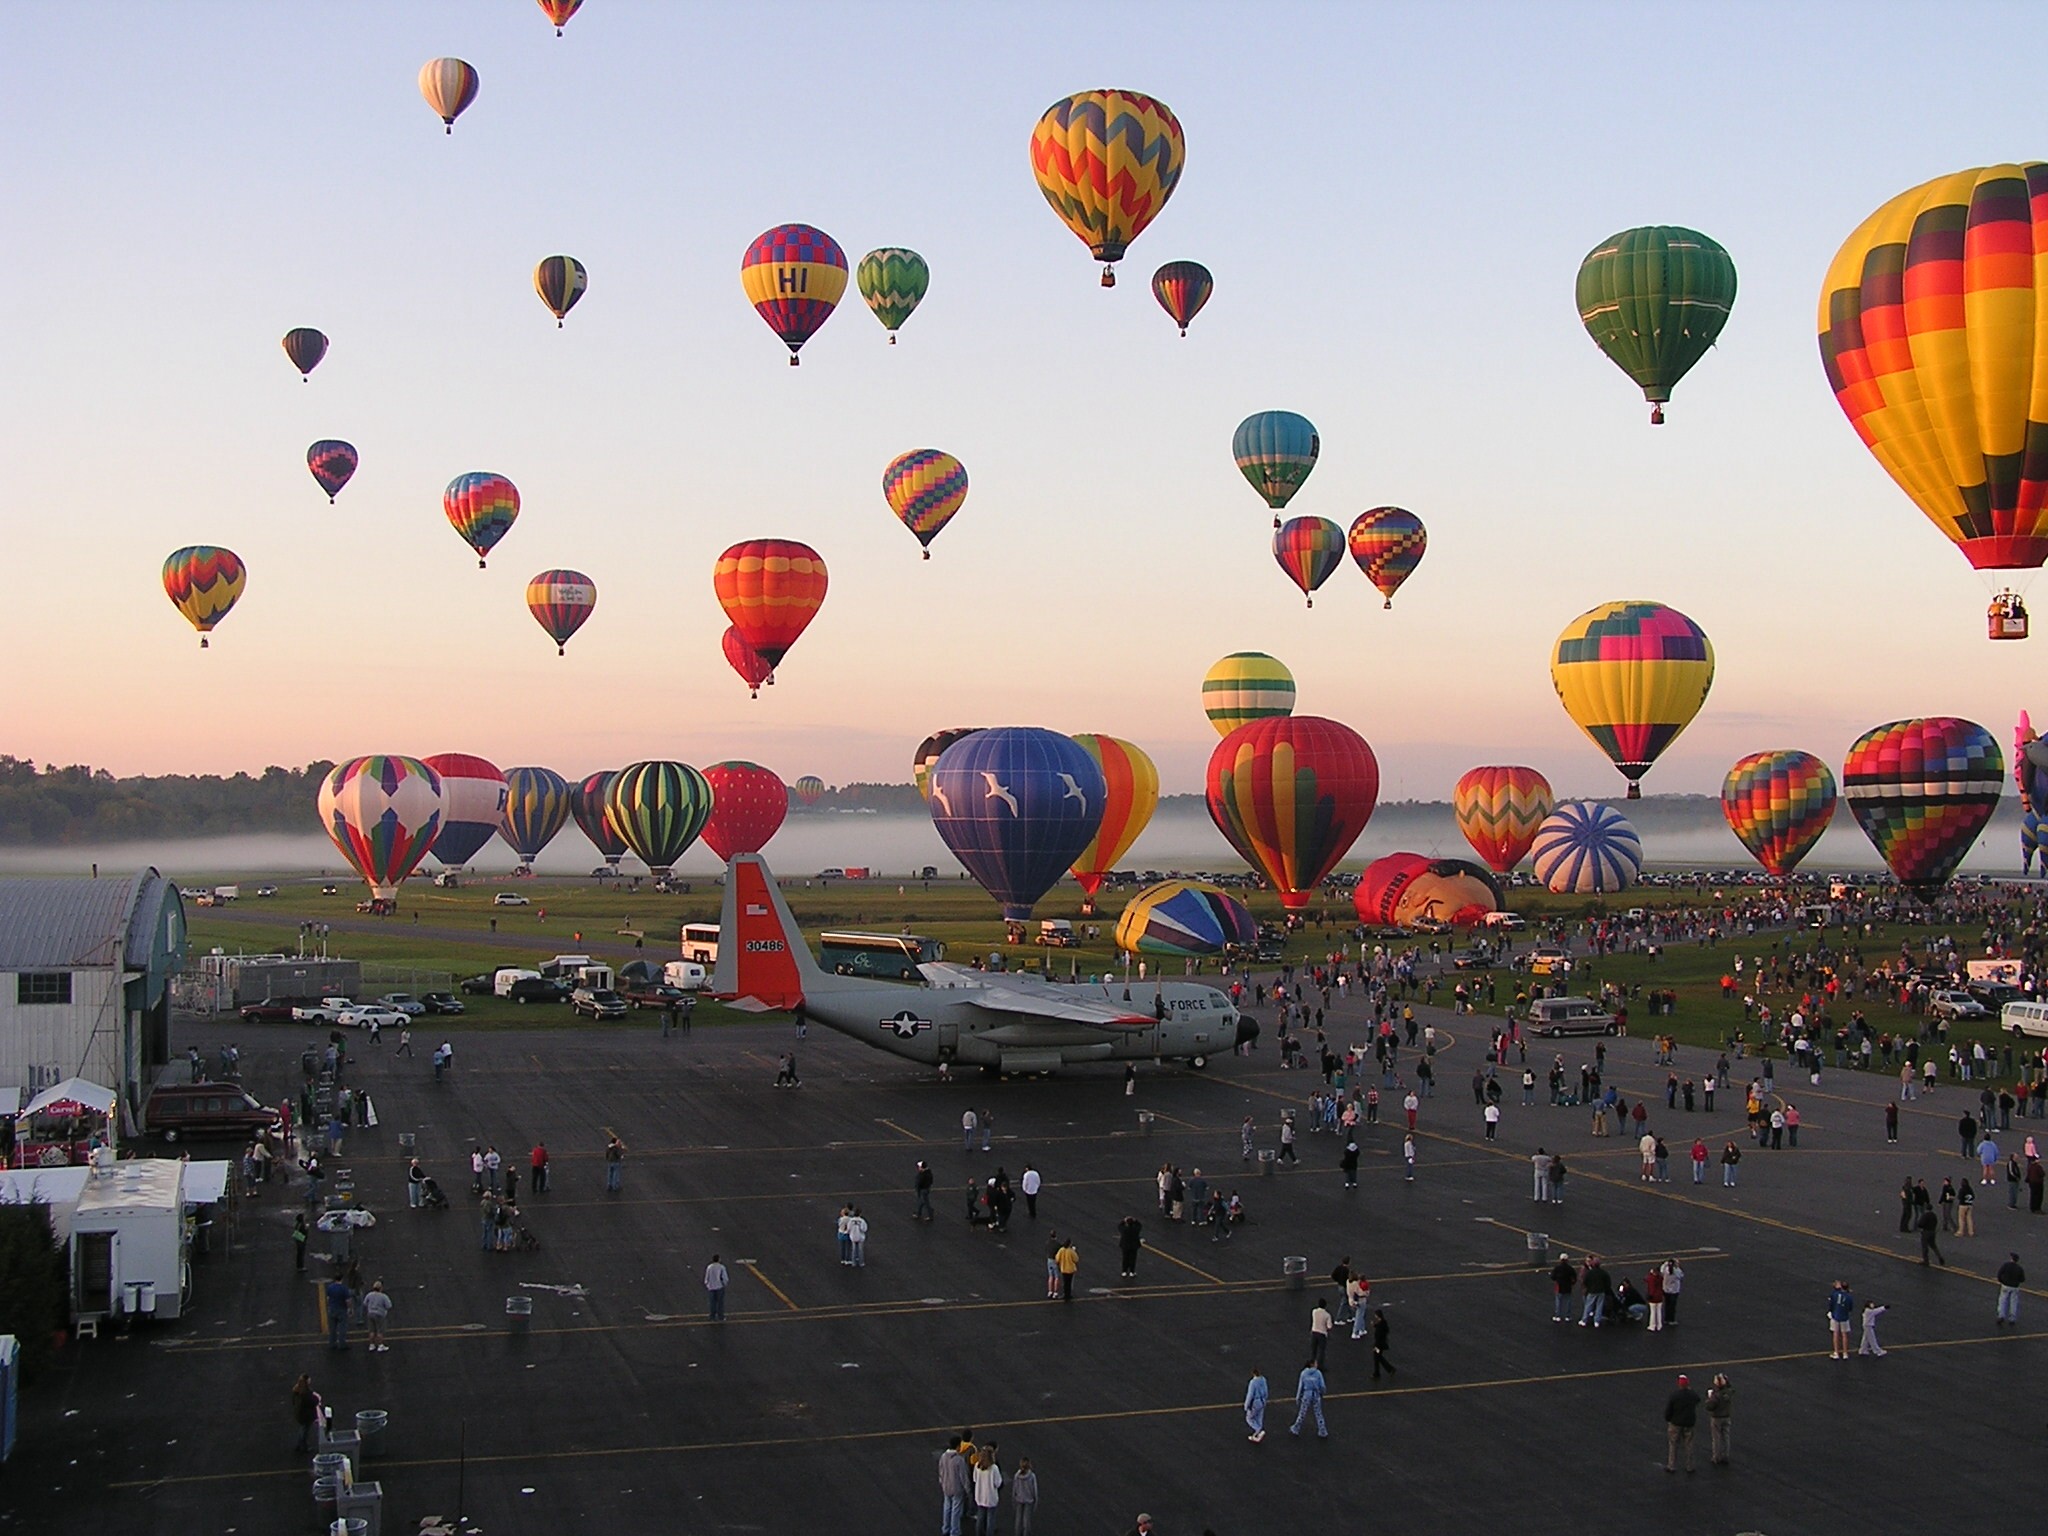 fantasy balloons festival picture